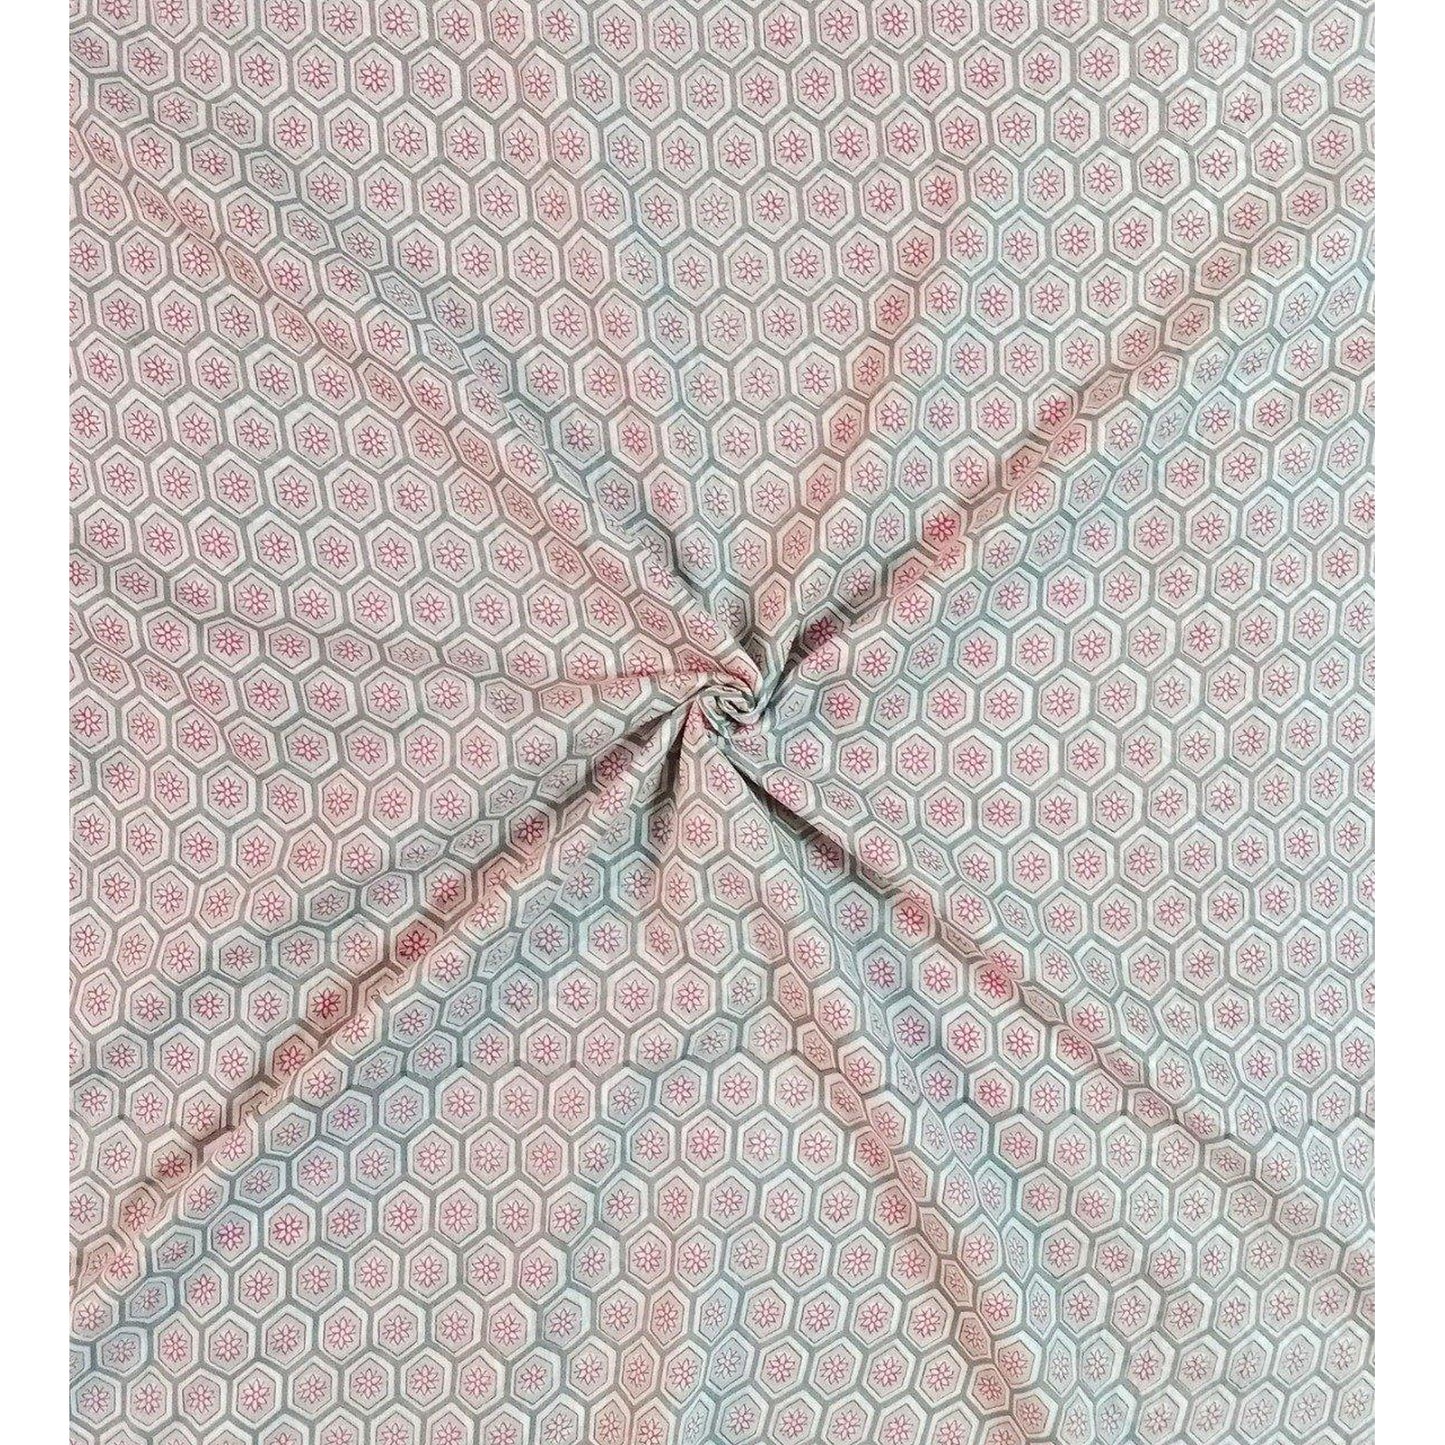 Pink and Grey cotton Camrik width 44 inches - The Teal Thread